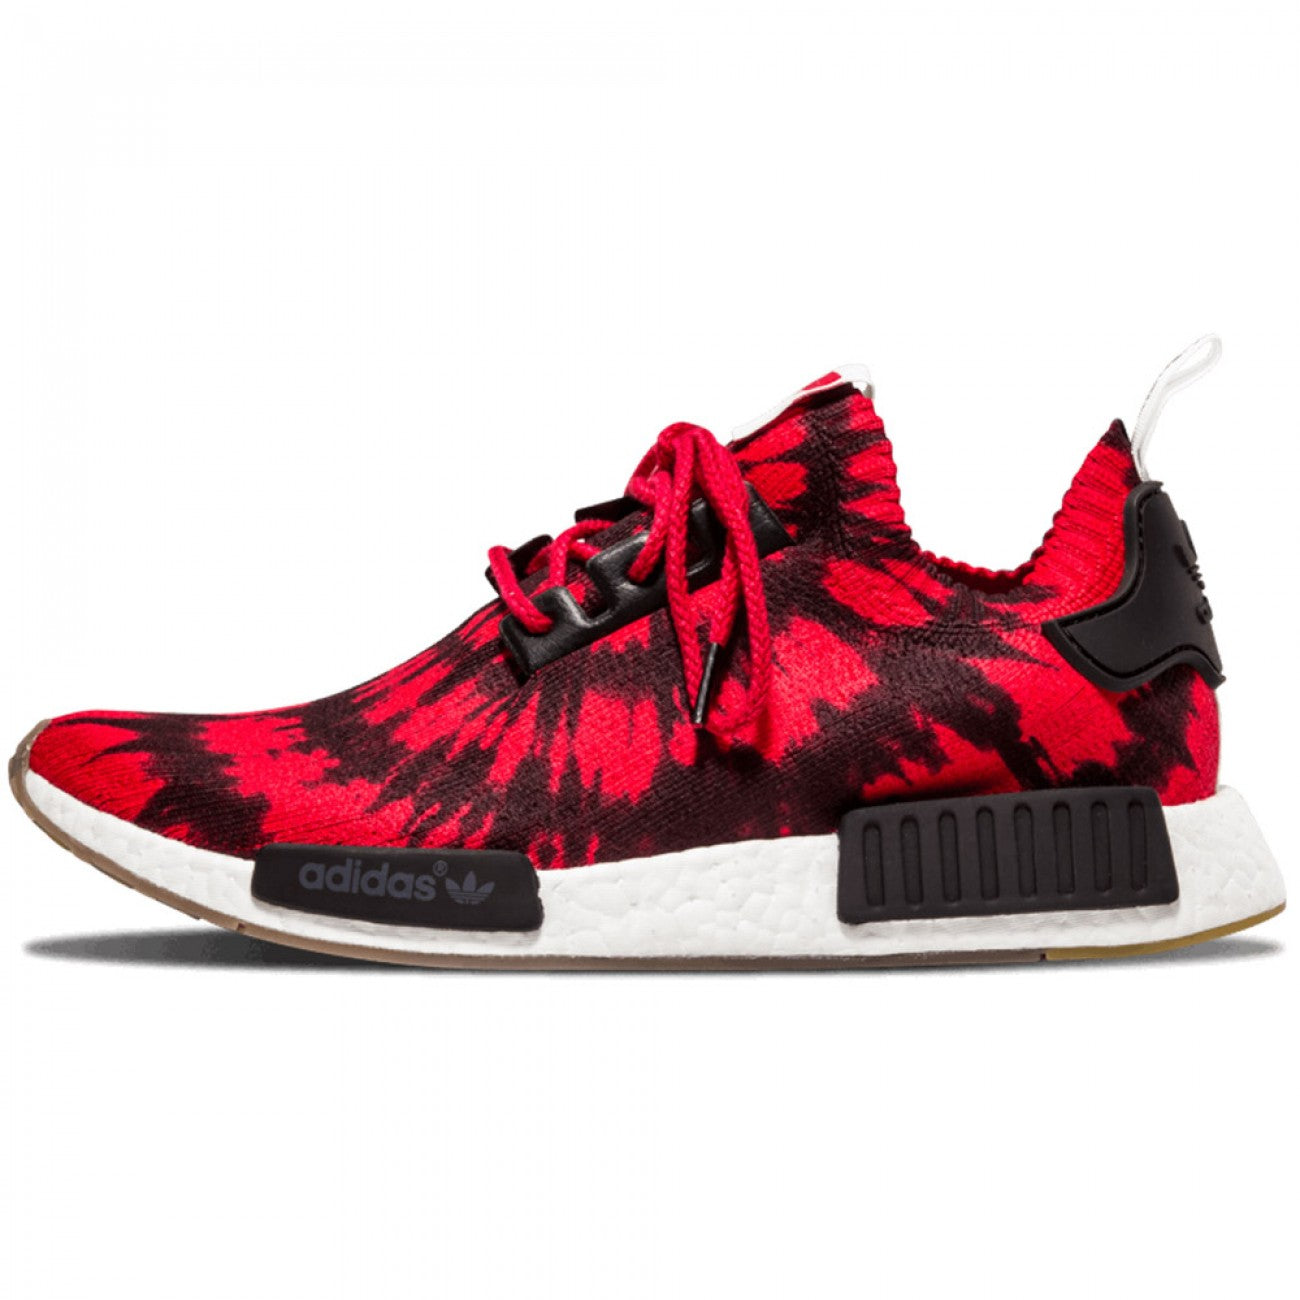 red tie dye nmd